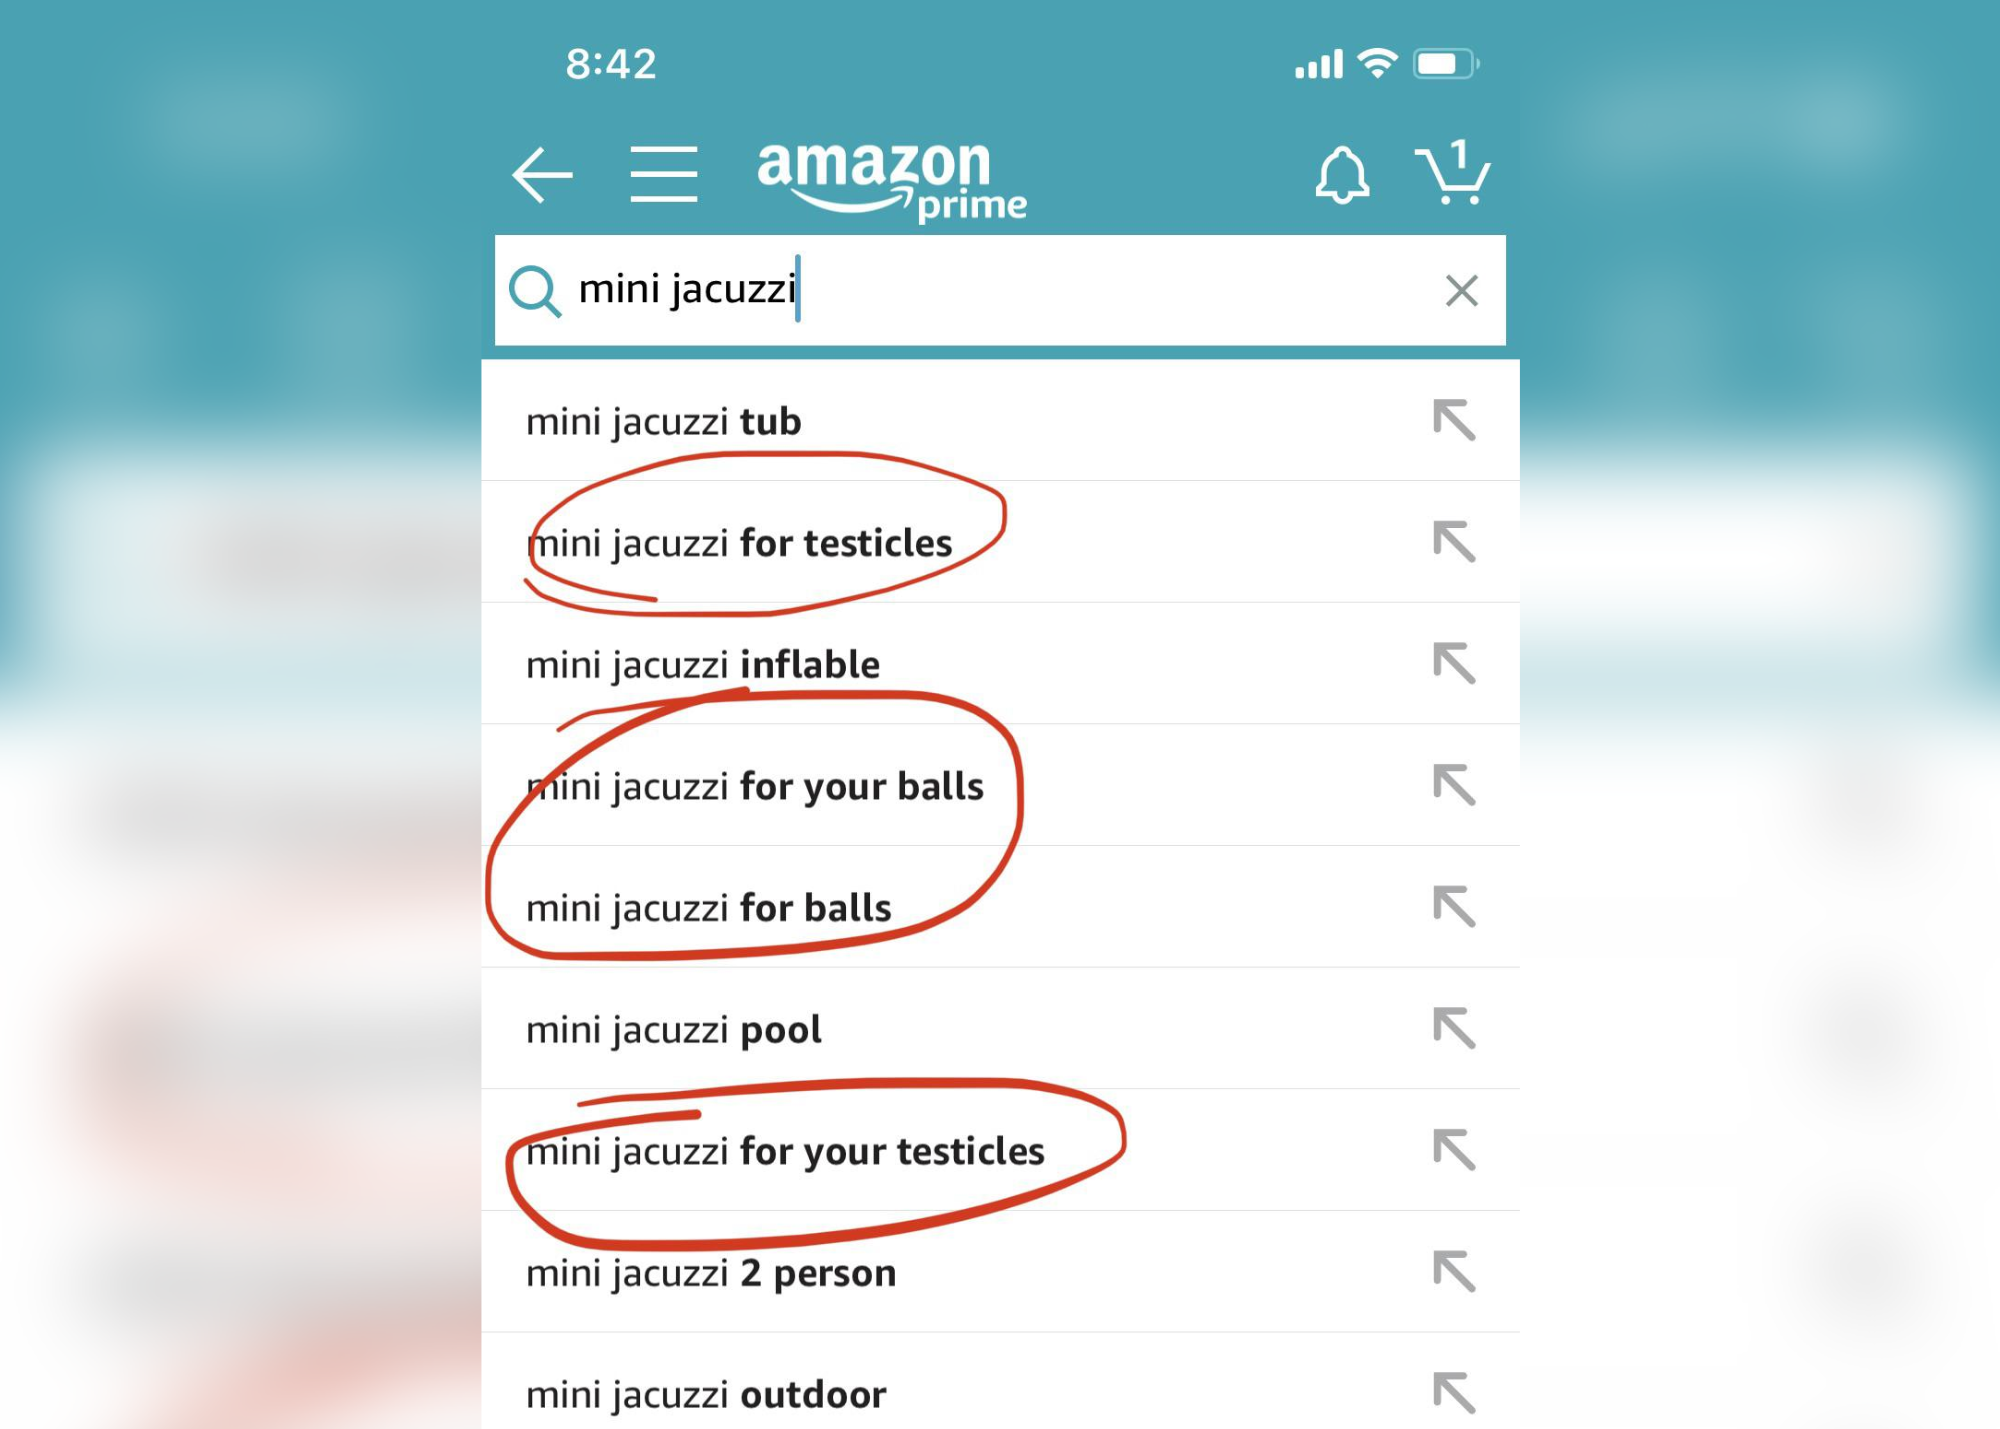 Hilarious Results After Searching For "Mini Jacuzzi" On Amazon Prime